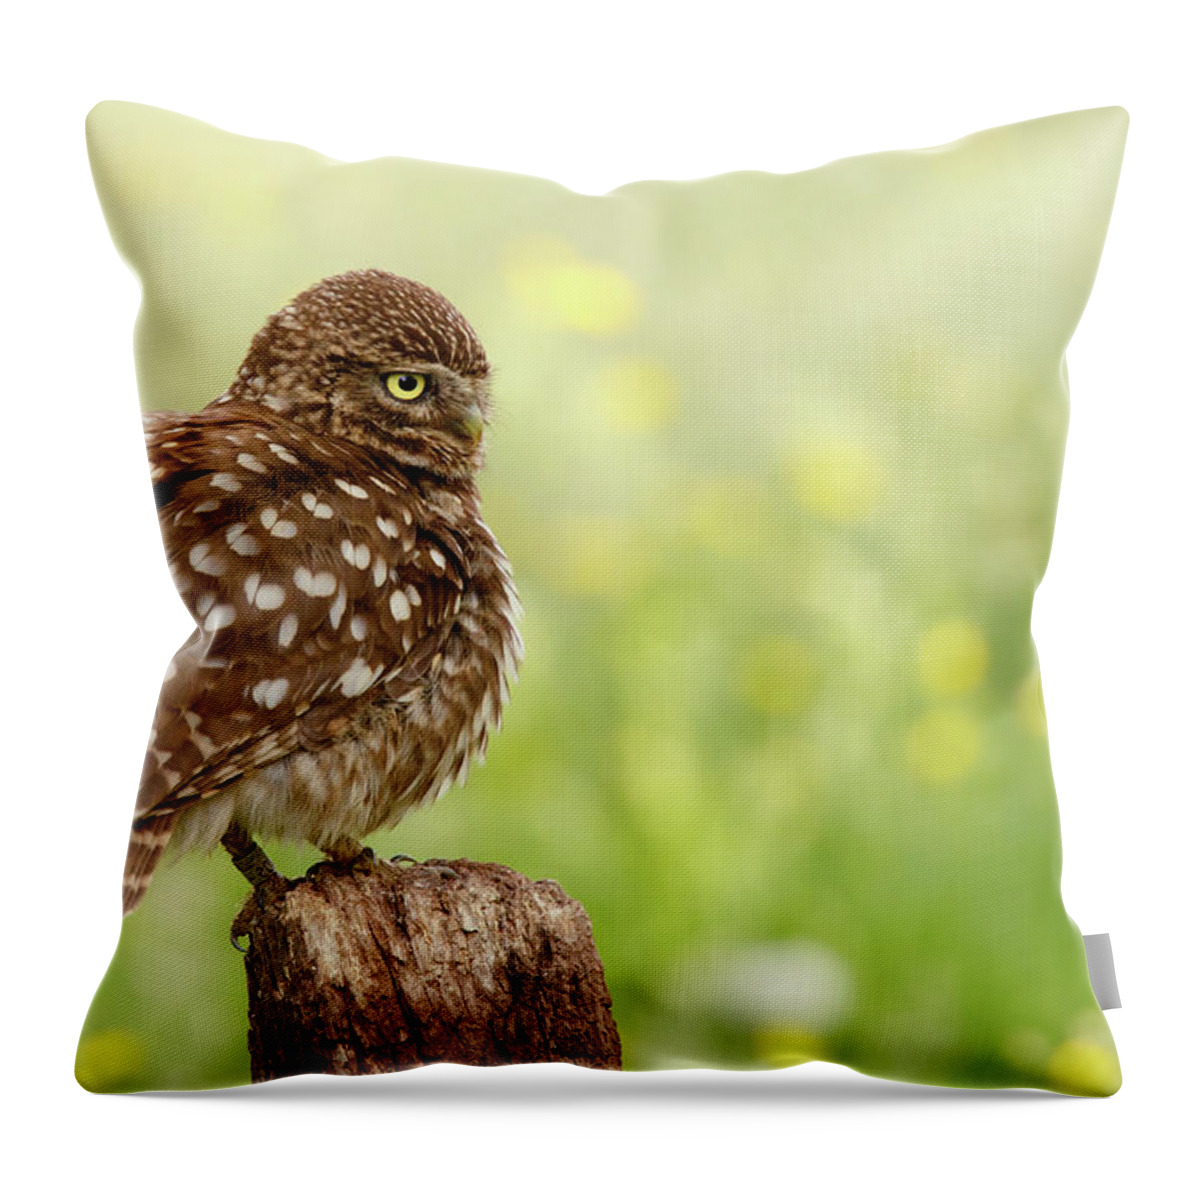 Adult Throw Pillow featuring the photograph The Thinker - Little Owl in a Flower Bed by Roeselien Raimond